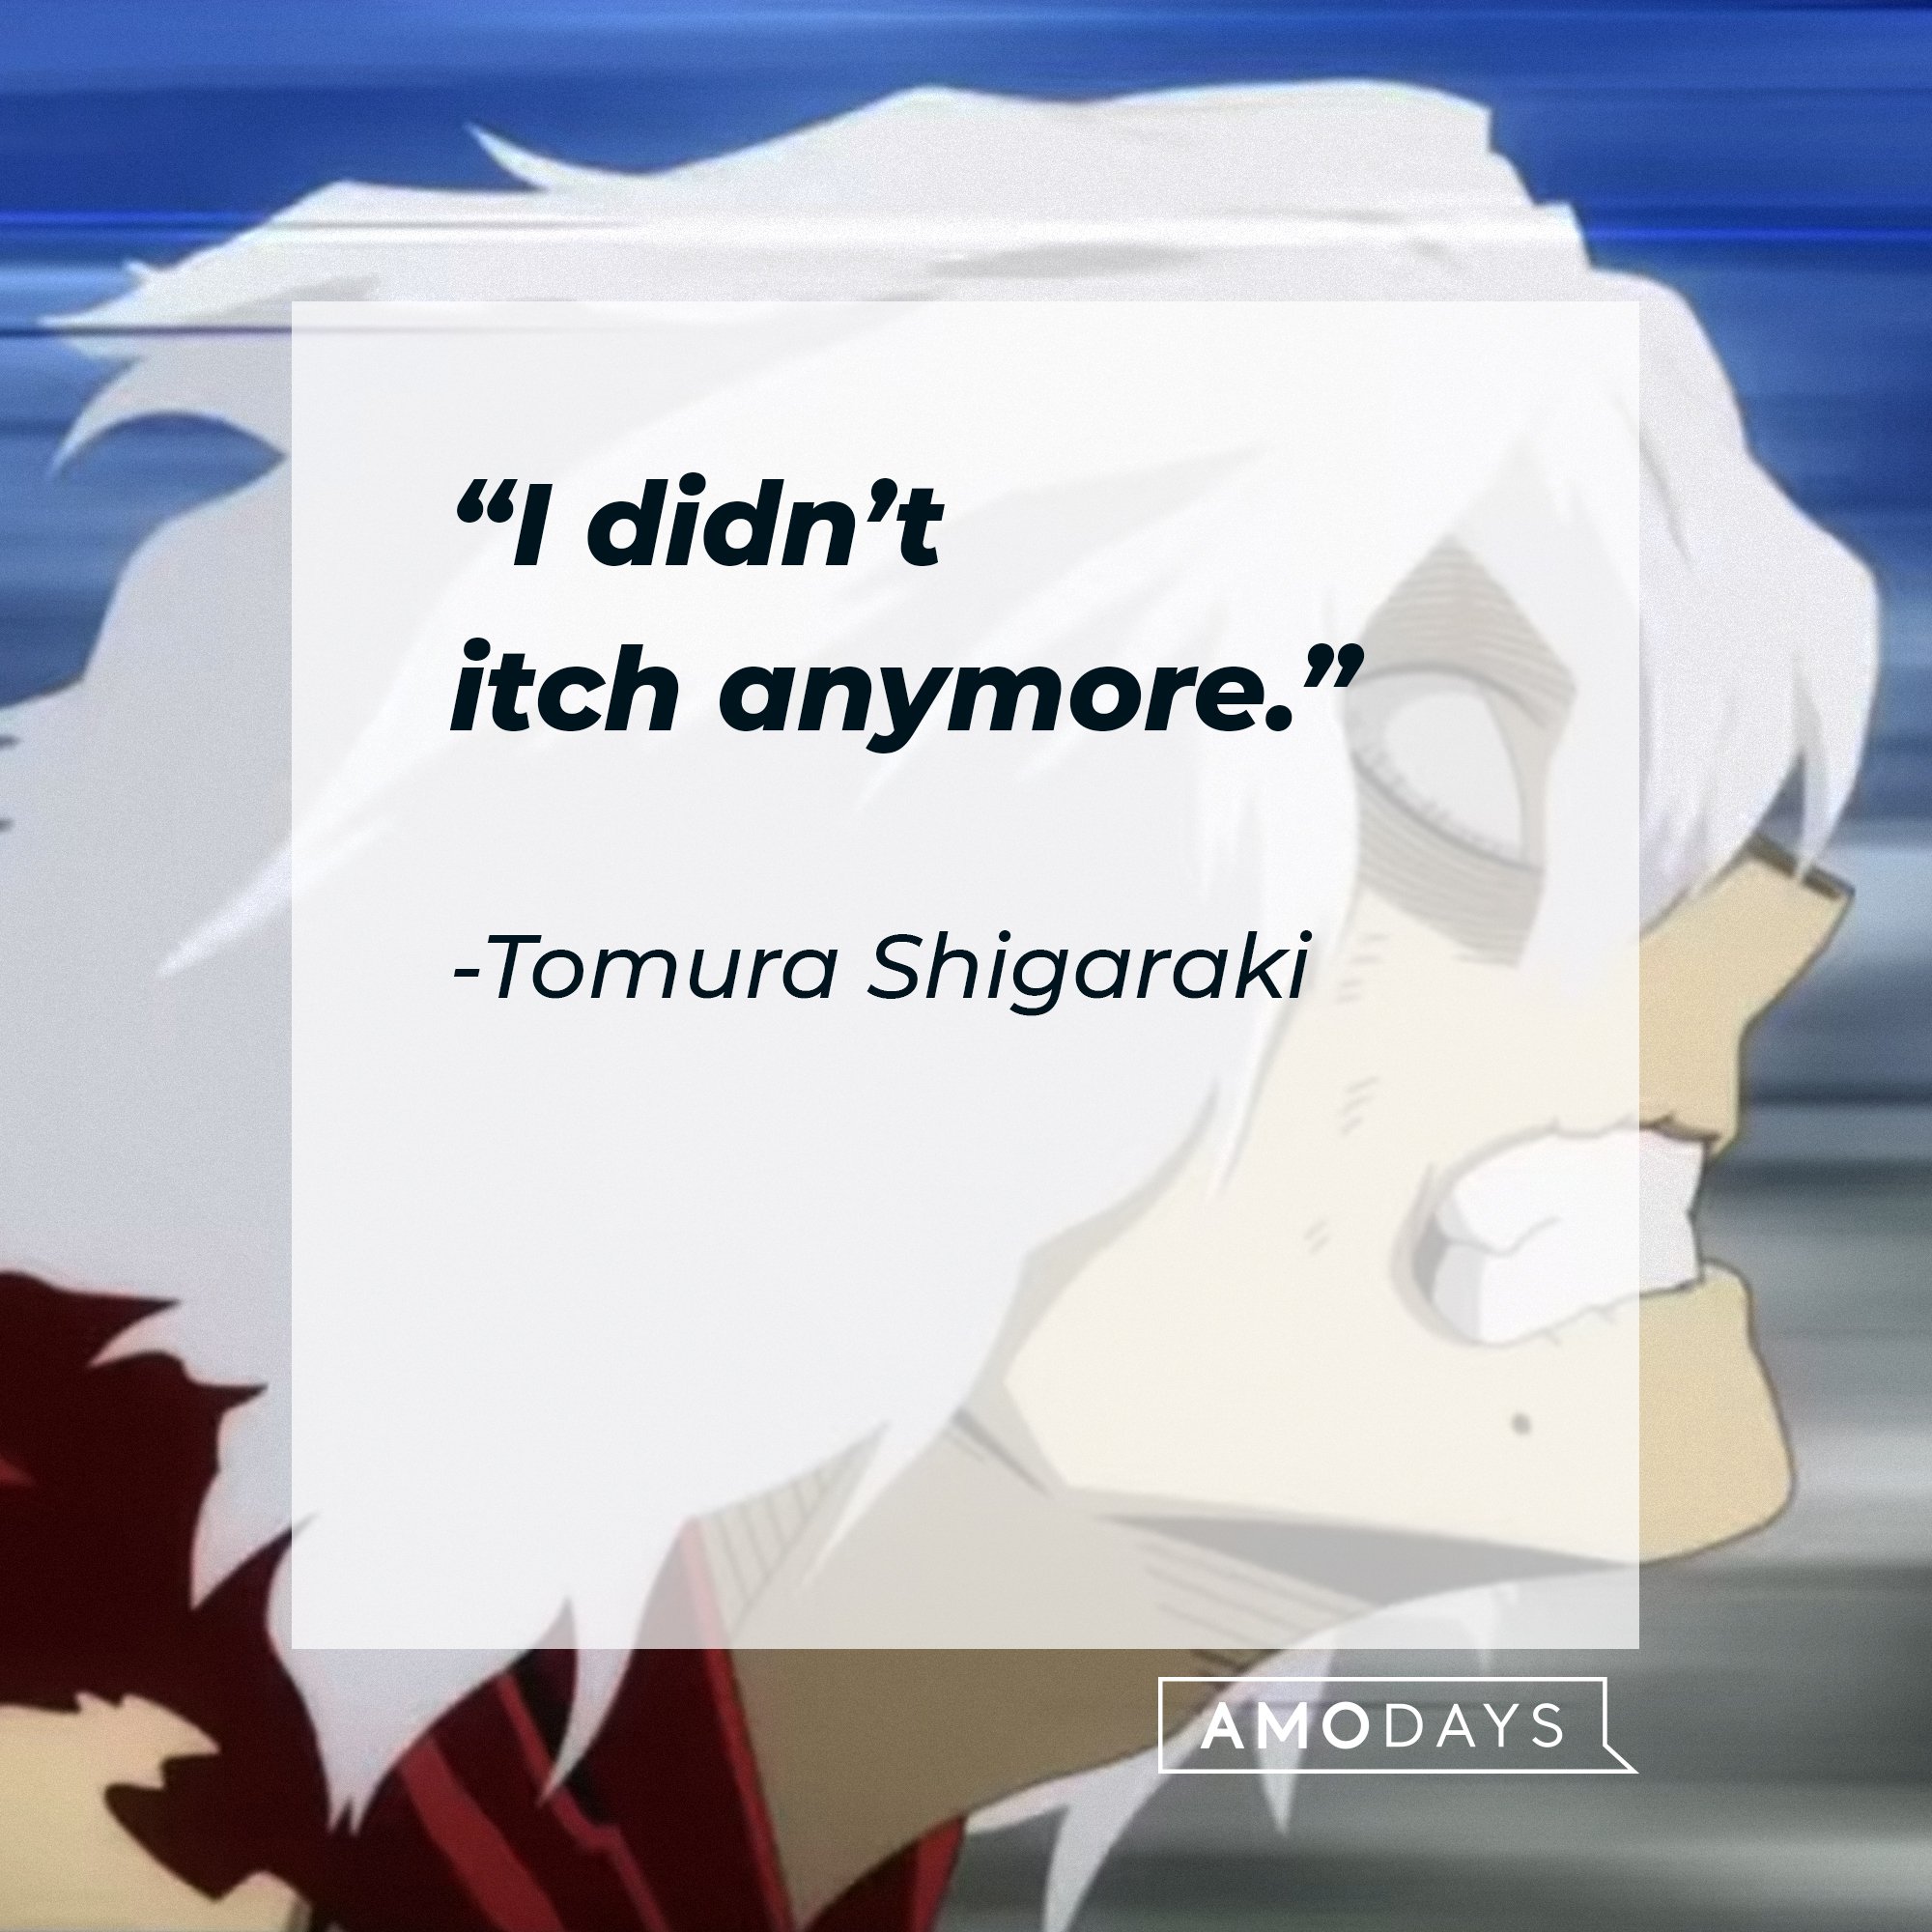 Tomura Shigaraki’s quote: “I didn’t itch anymore.” | Image: AmoDays